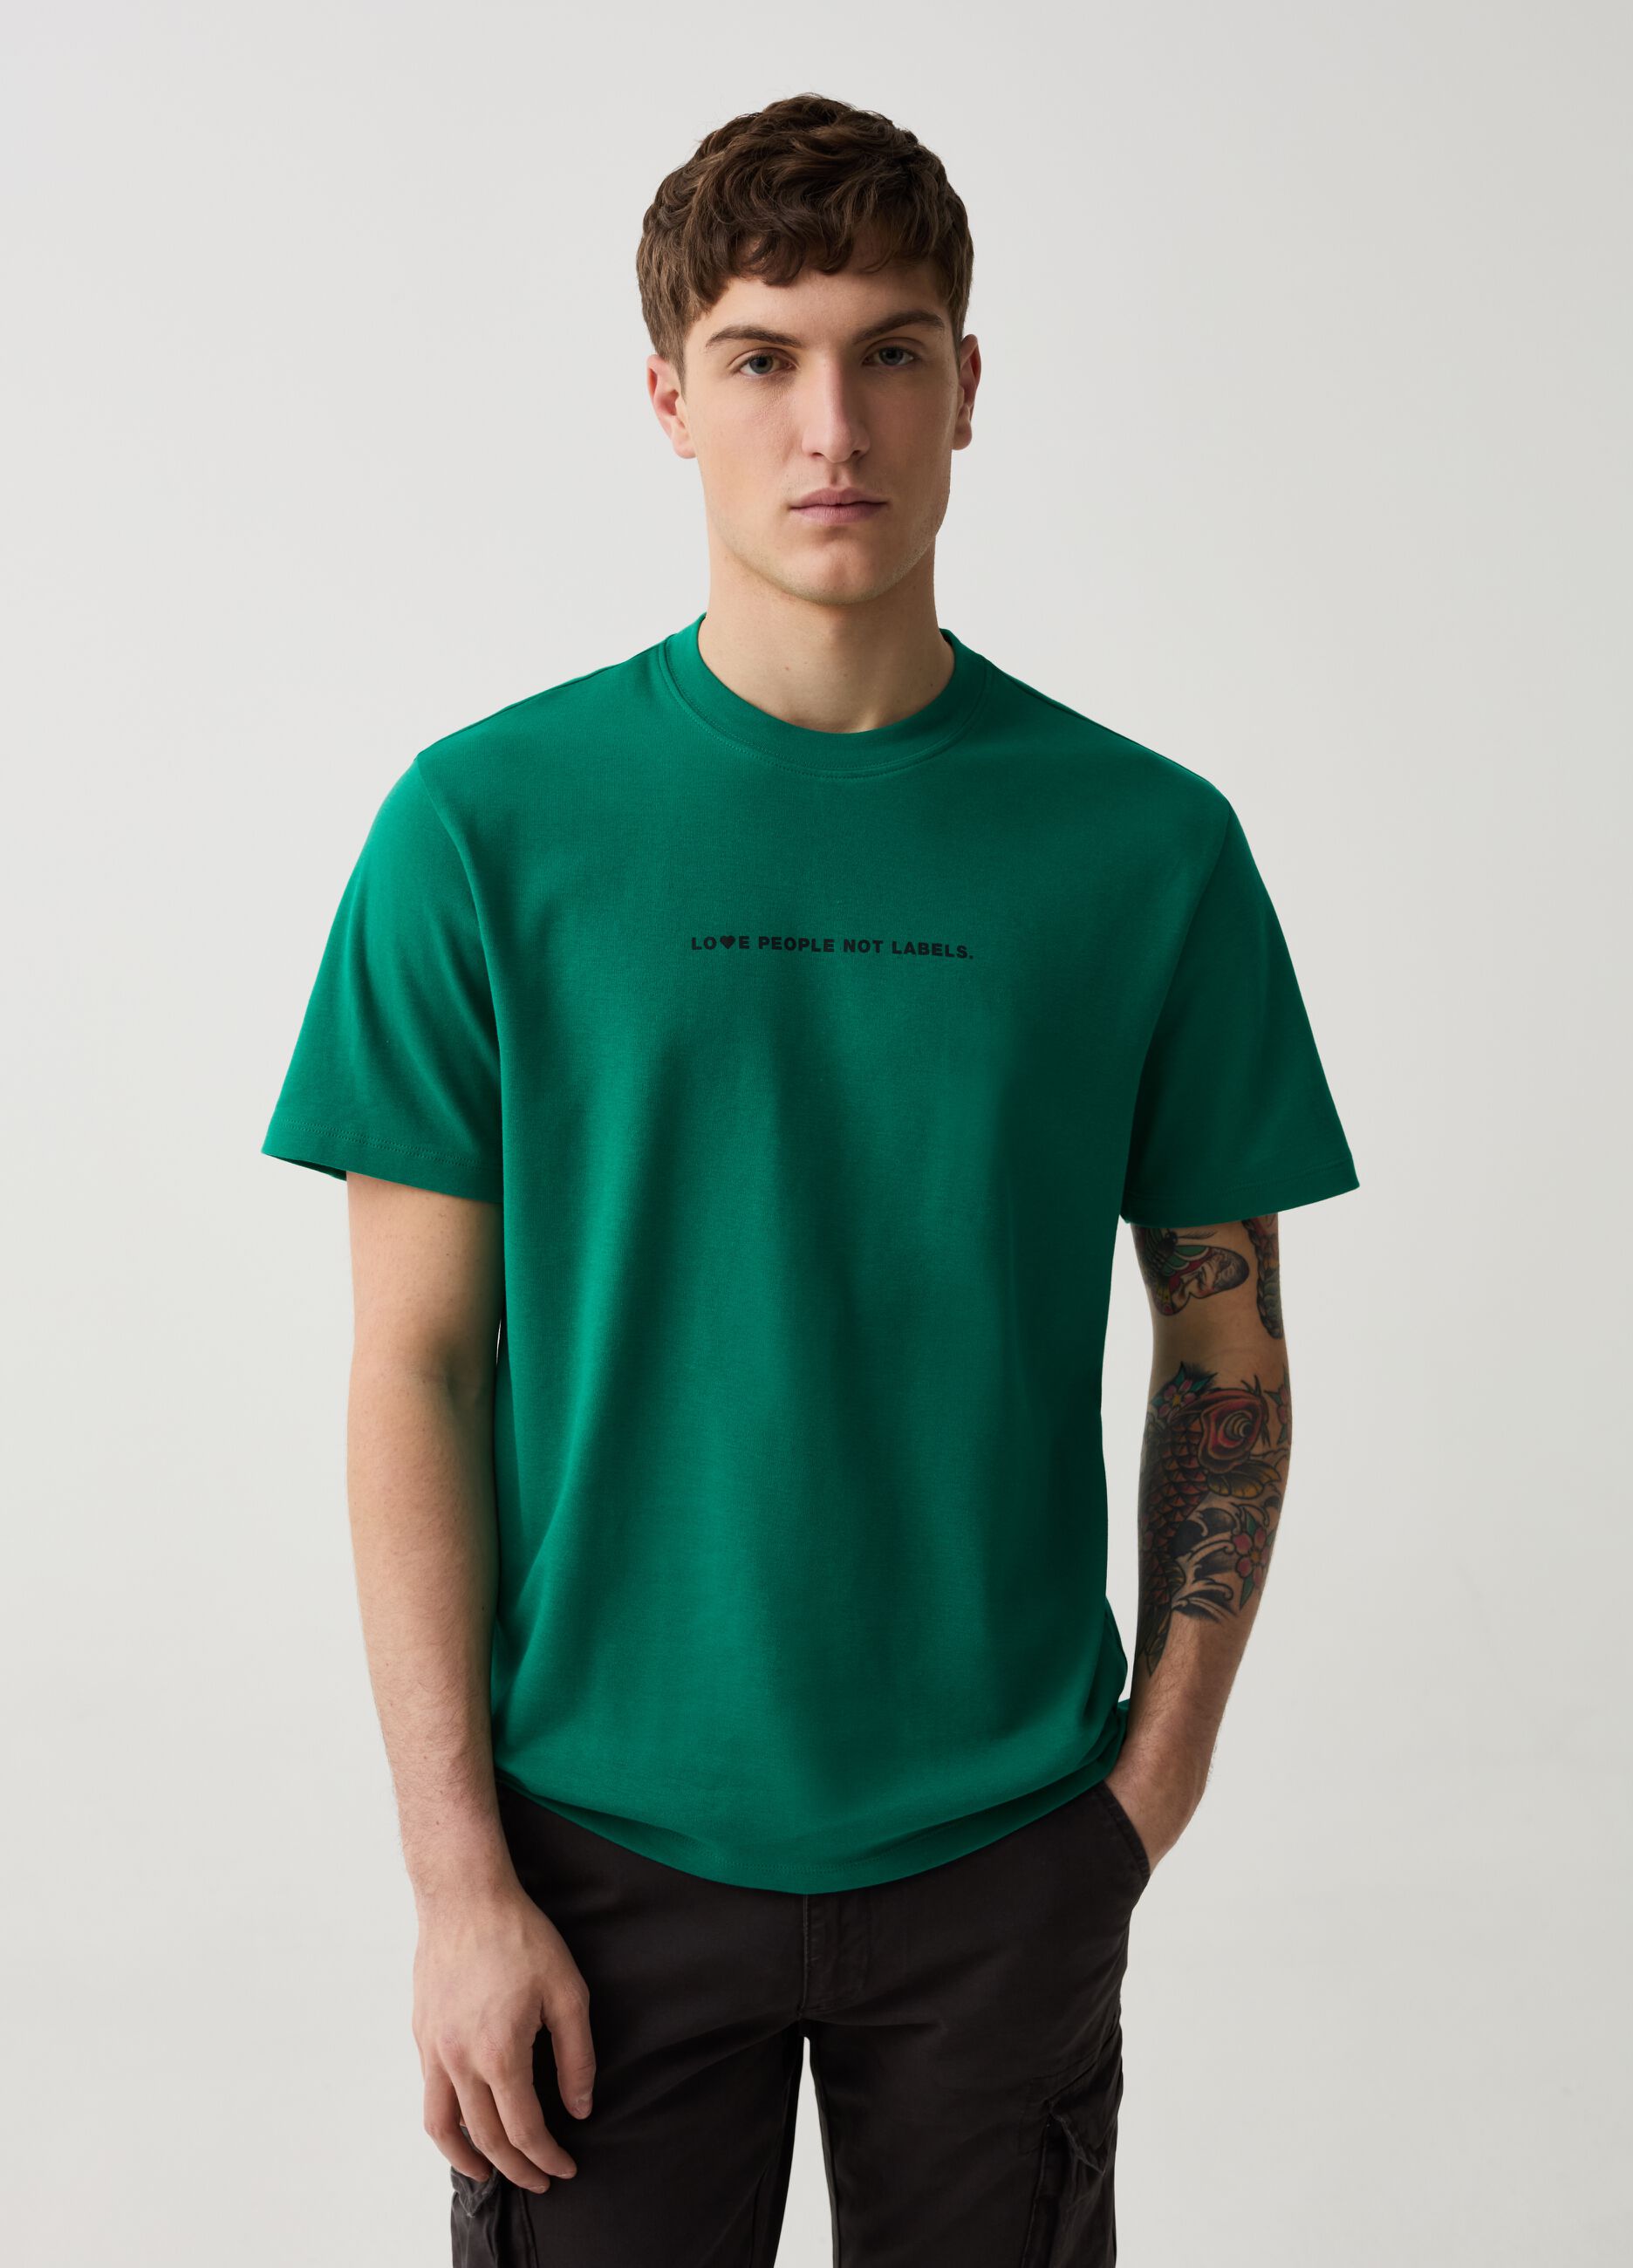 T-shirt with printed lettering